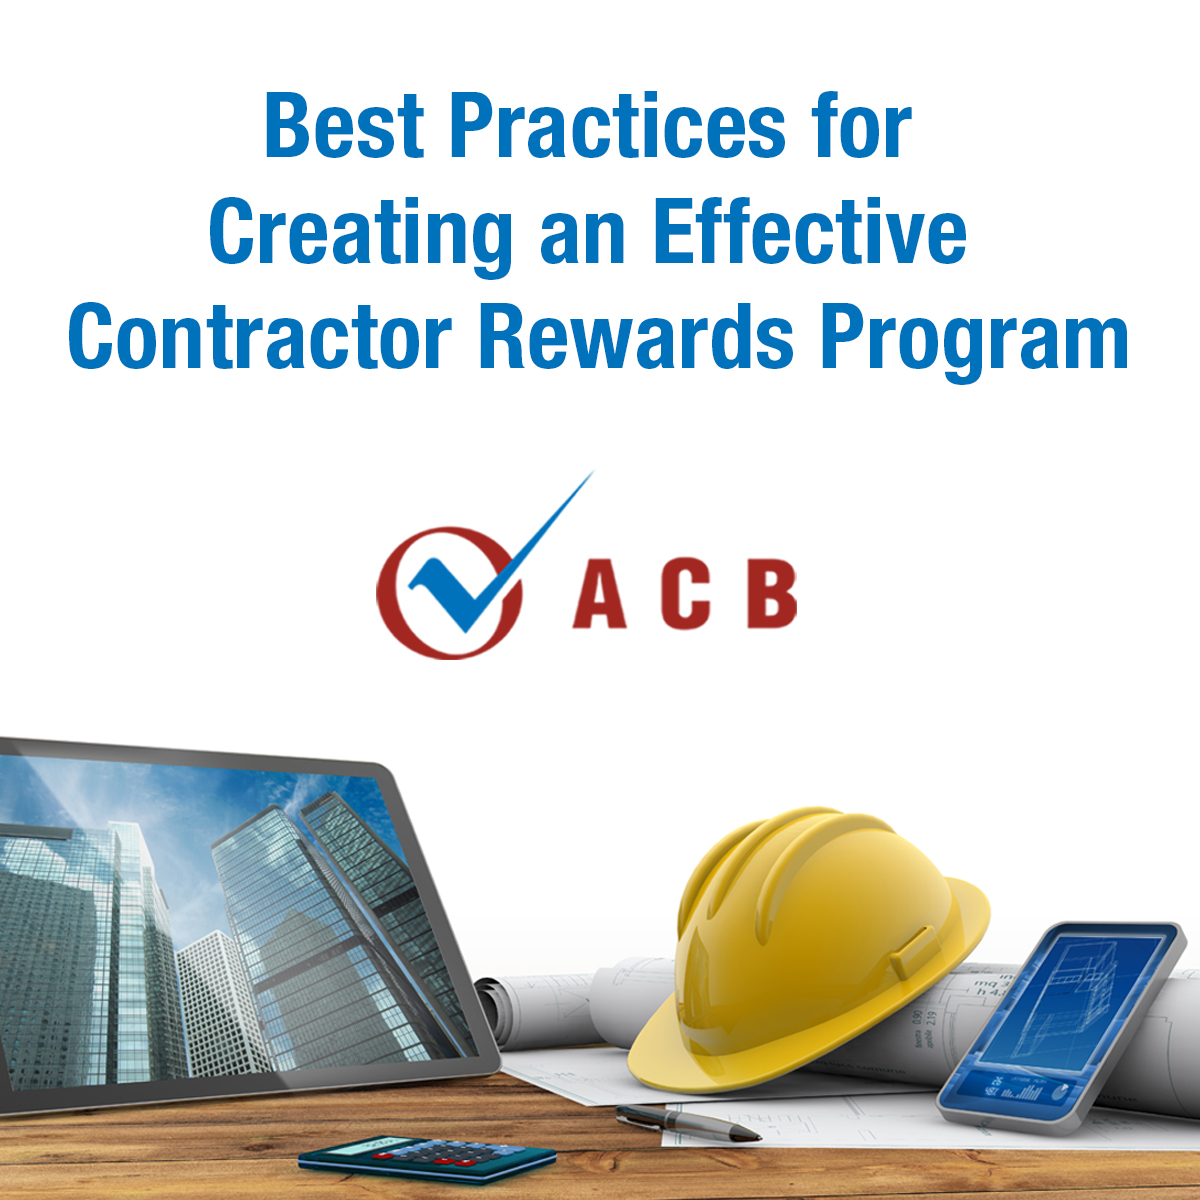 building-an-effective-contractor-rewards-program-to-capitalize-on-today